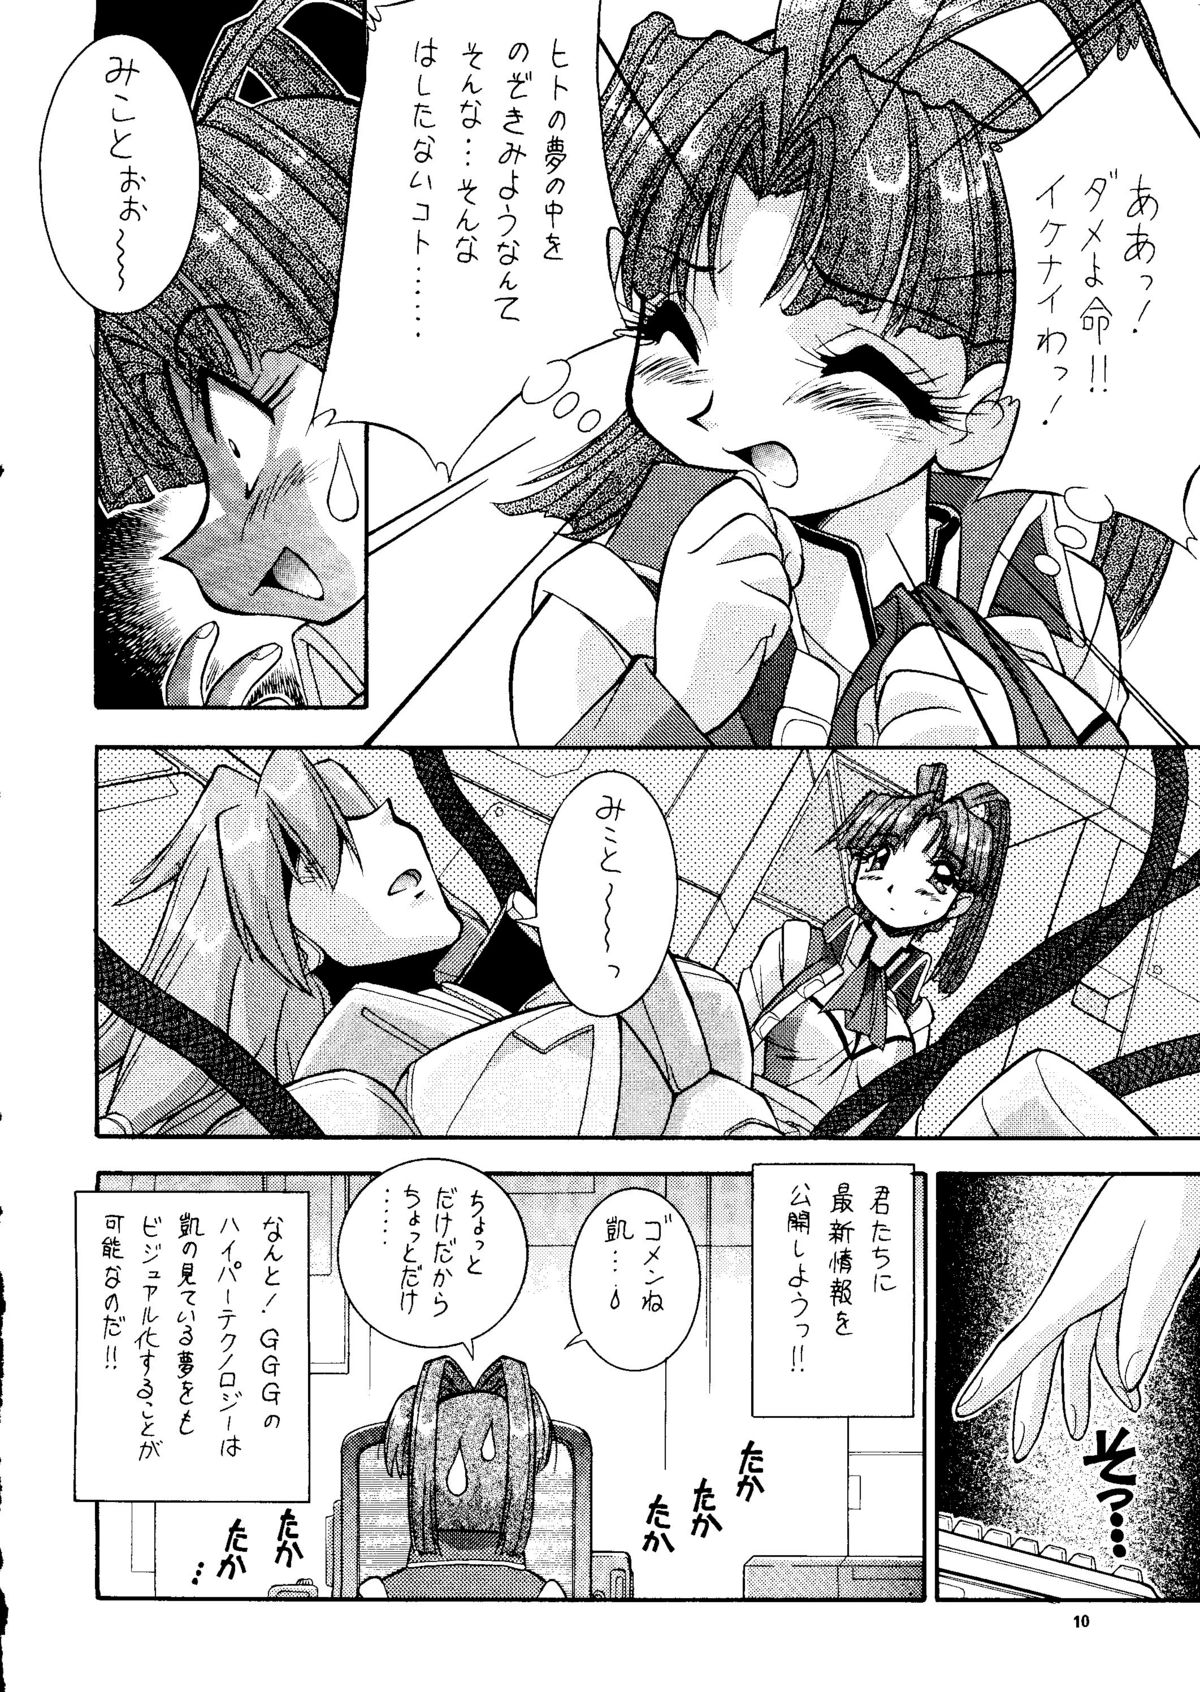 [Studio Toy] Yoseatume Galary 7 (Gaogaigar, YAT - Space Travel Agency, Nadesico) page 9 full